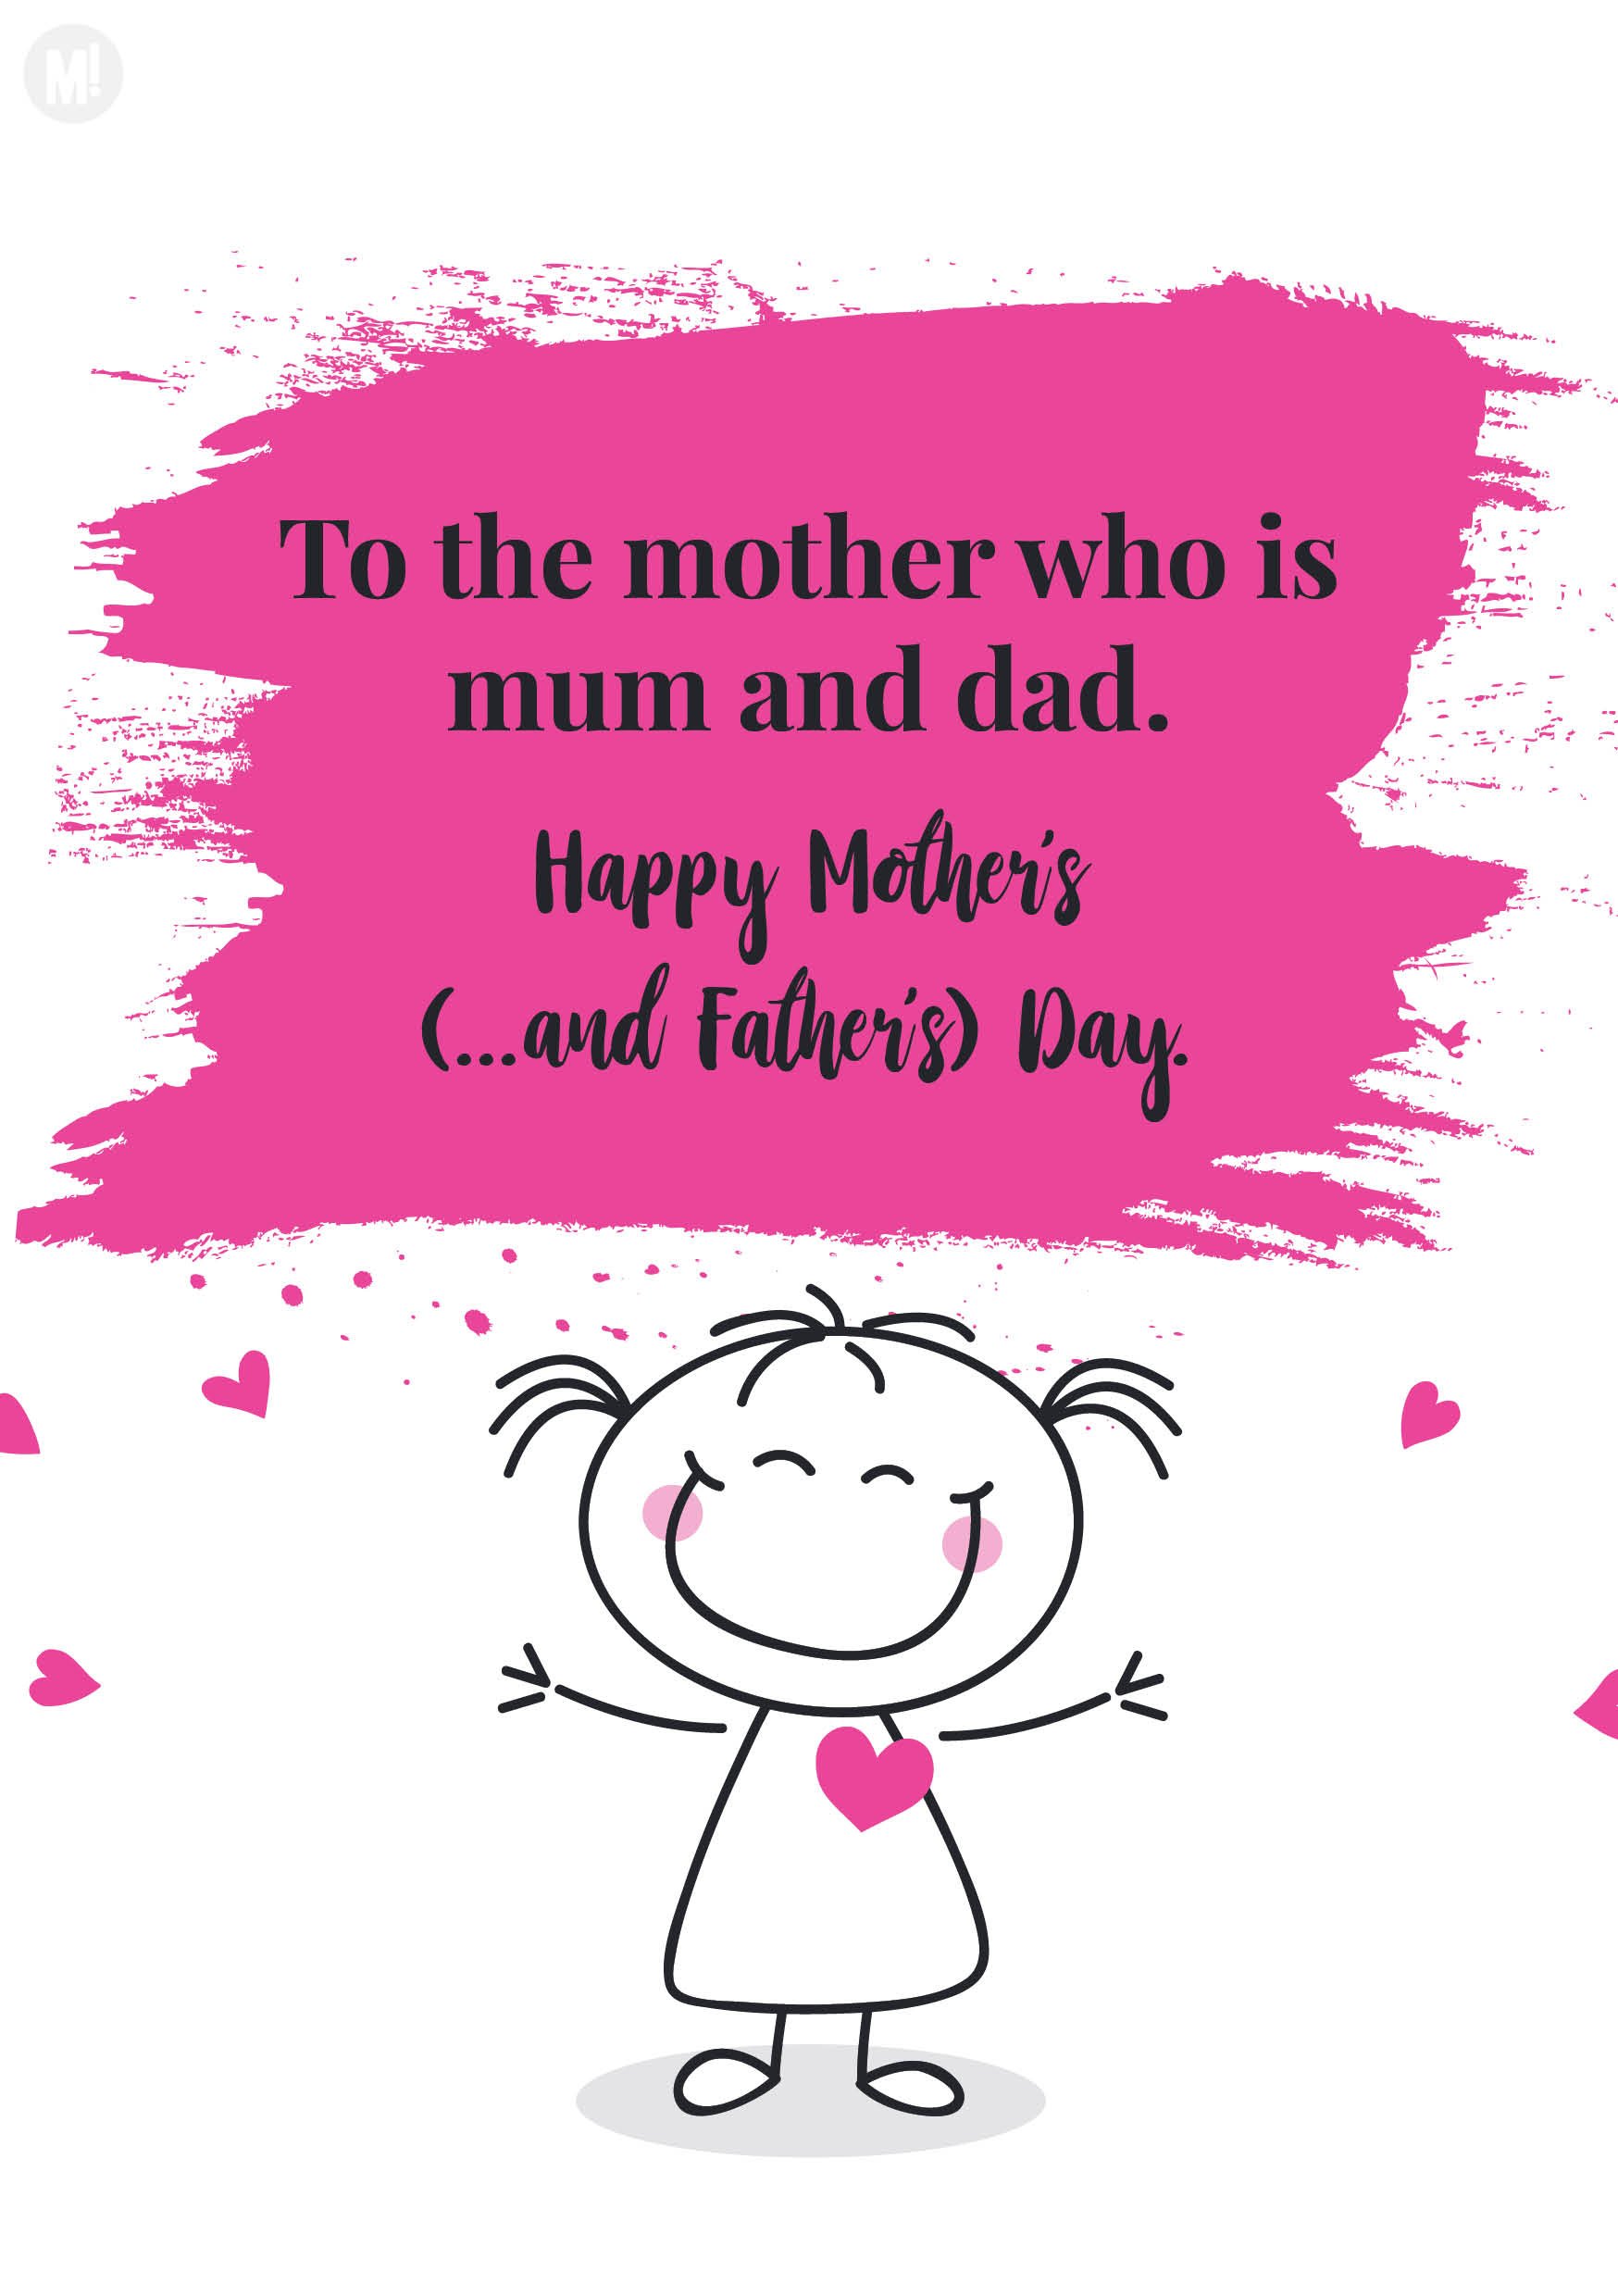 Happy Mothers Day: To the mother who is mum and dad. Happy Mother's (... and father's) day.